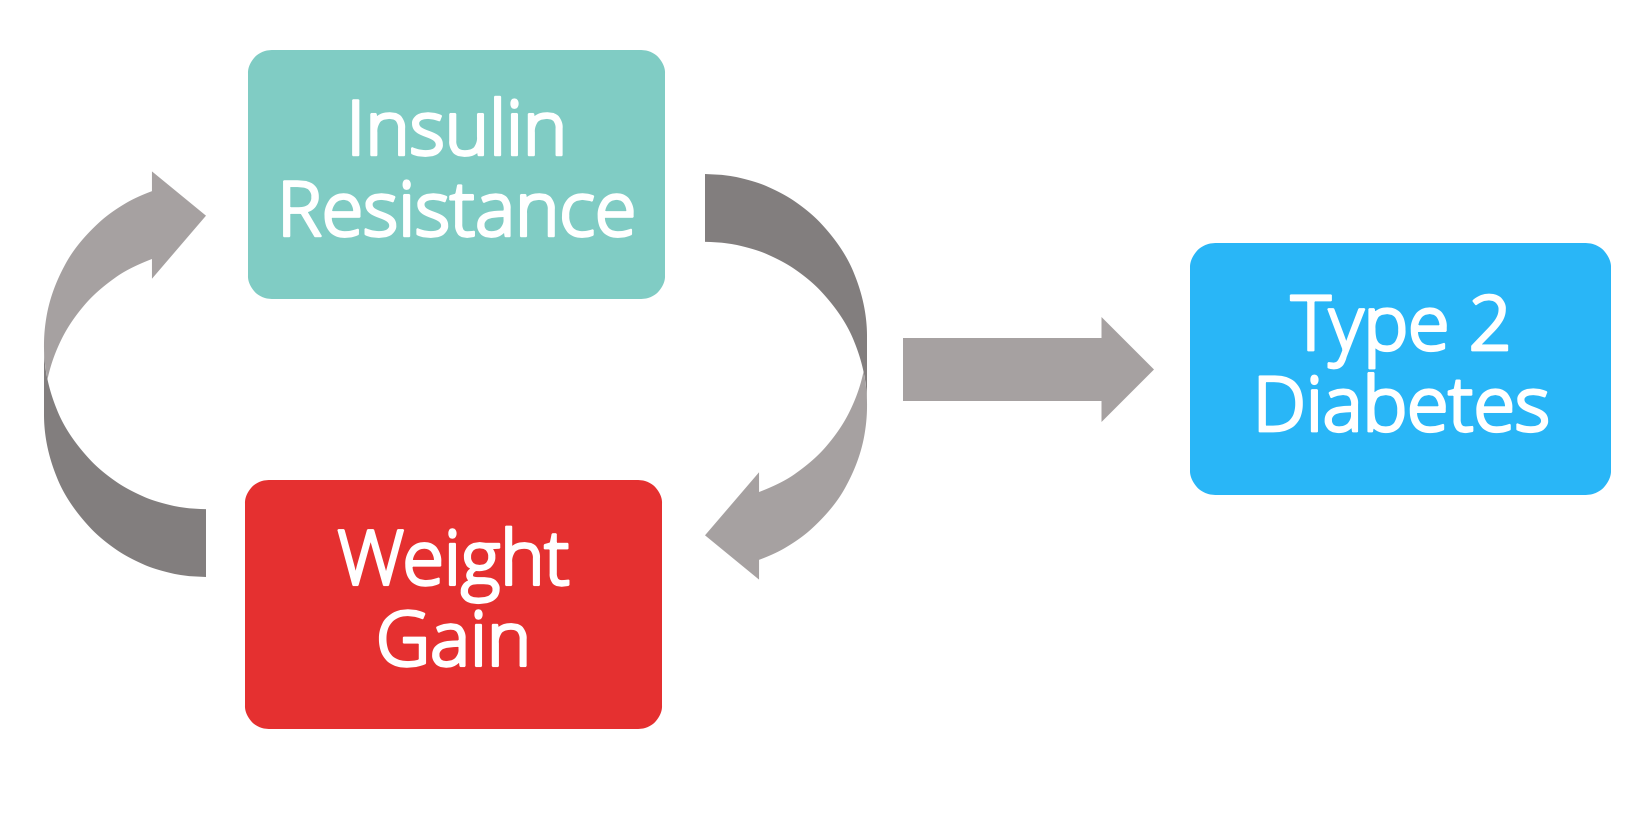 Insulin resistance and weight gain in a self-perpetuating cycle until type 2 diabetes develops.